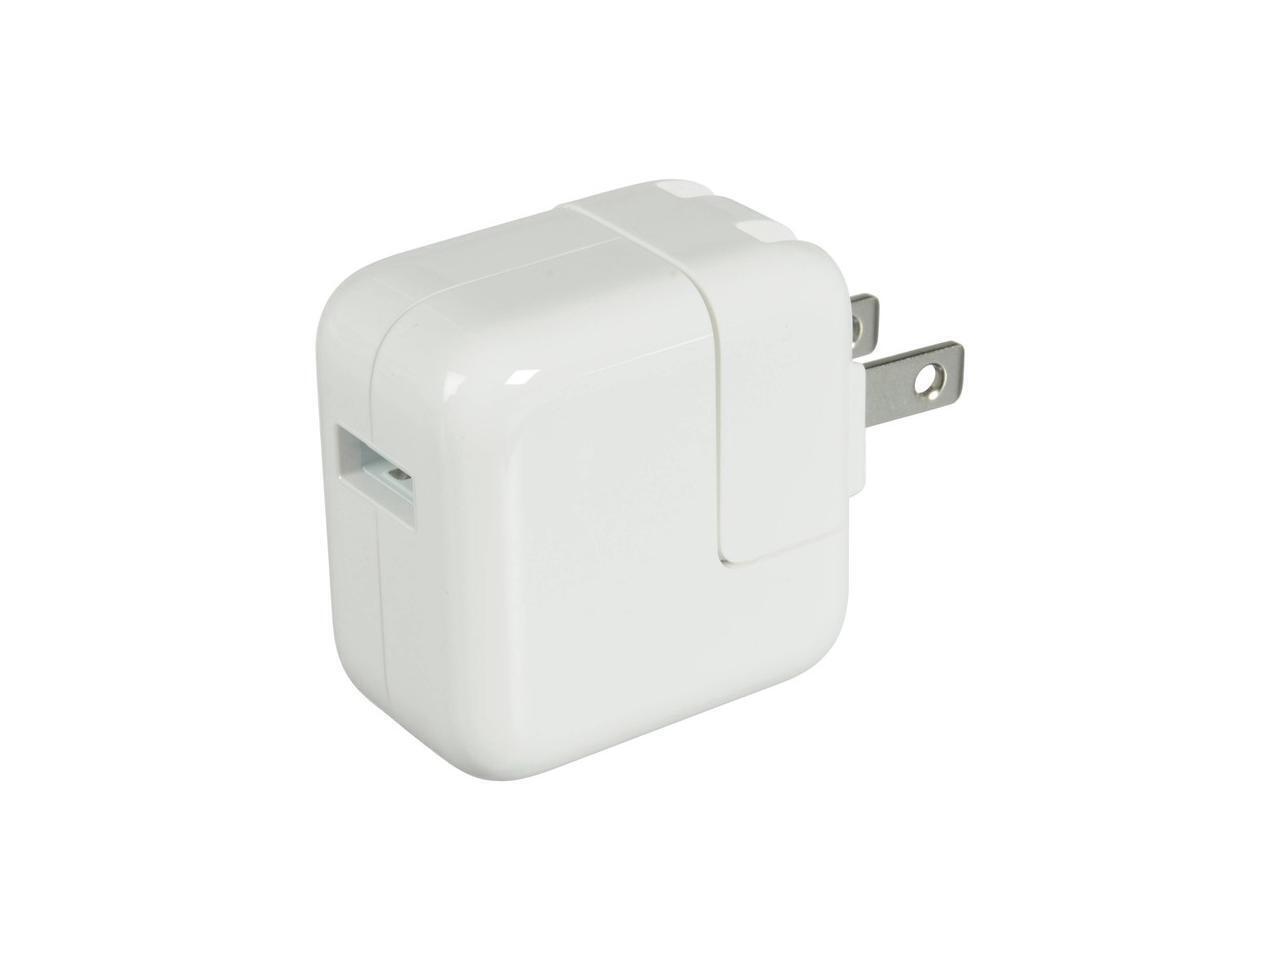 4XEM White 2.1AMP Wall Charger for iPad 4XIPADCHARGER